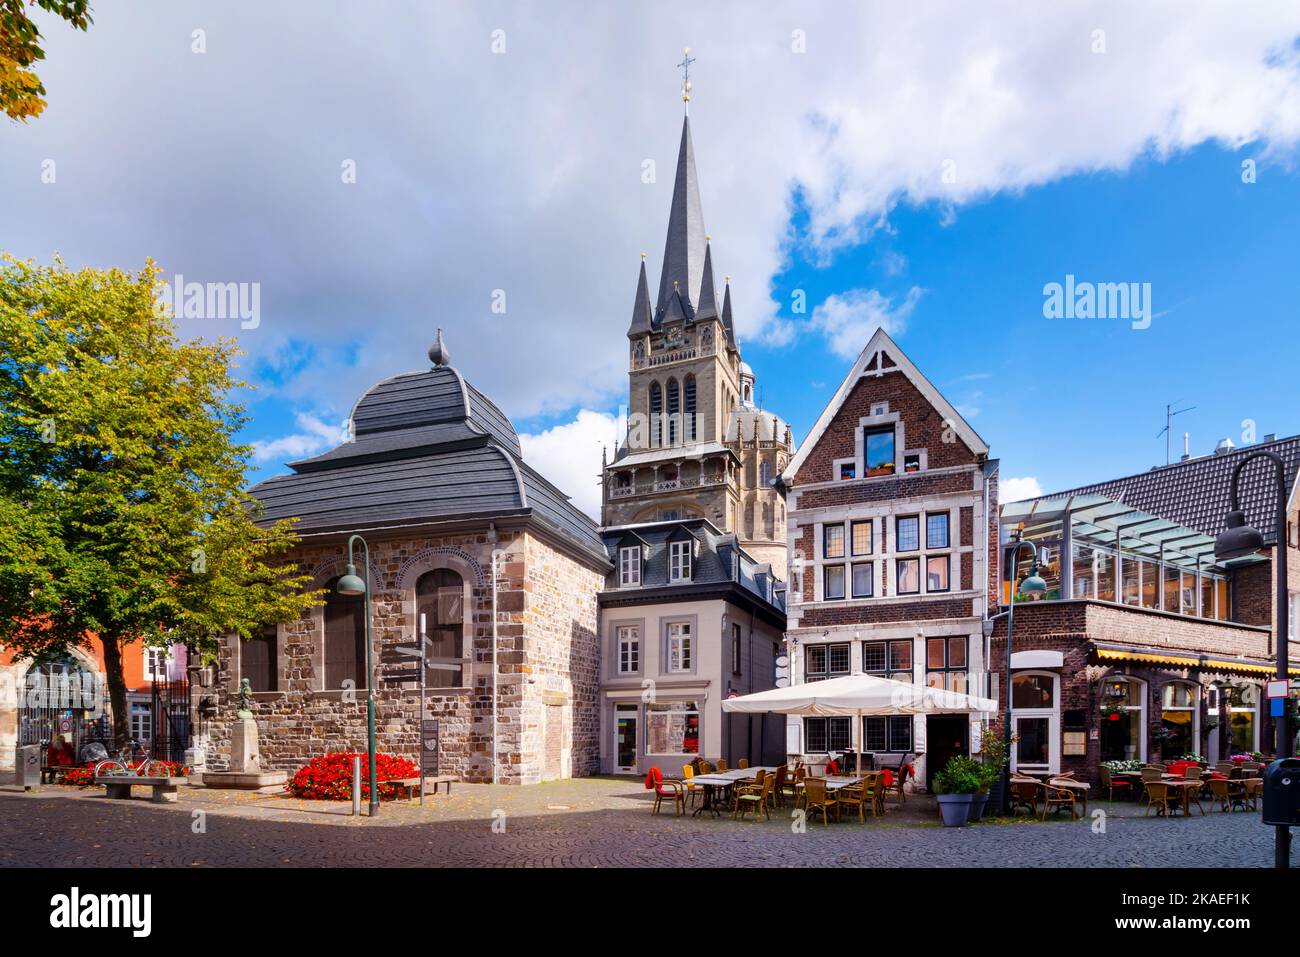 View to the cathedral. The Aachen Cathedral (German: Aachener Dom) is a Roman Catholic church in Aachen, Germany Stock Photo